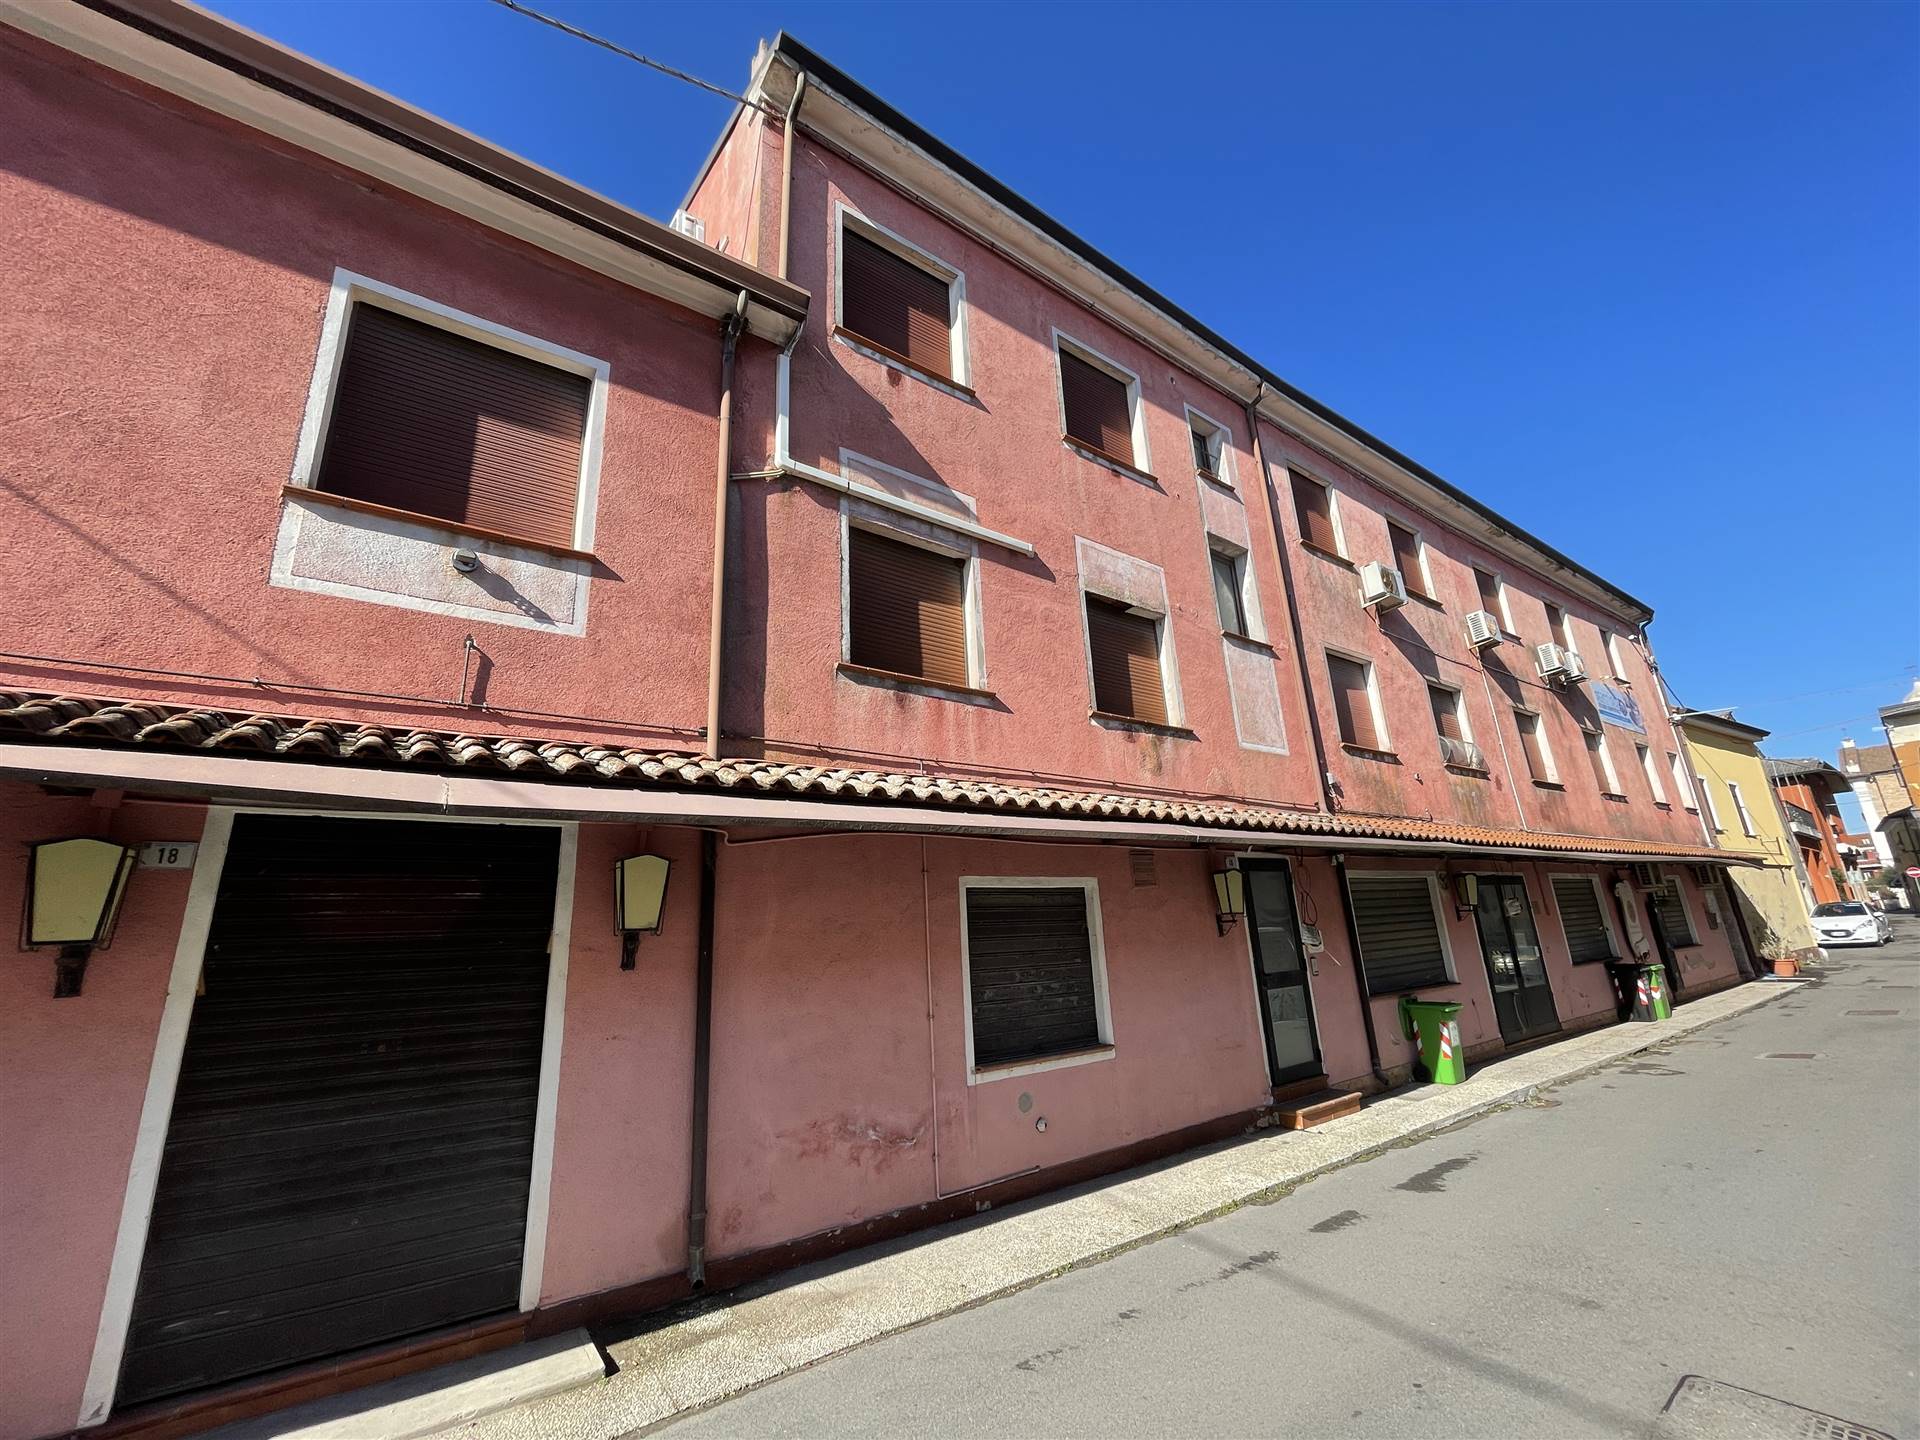 LOREO, Hotel for sale of 485 Sq. mt., Energetic class: G, composed by: , Price: € 199,000